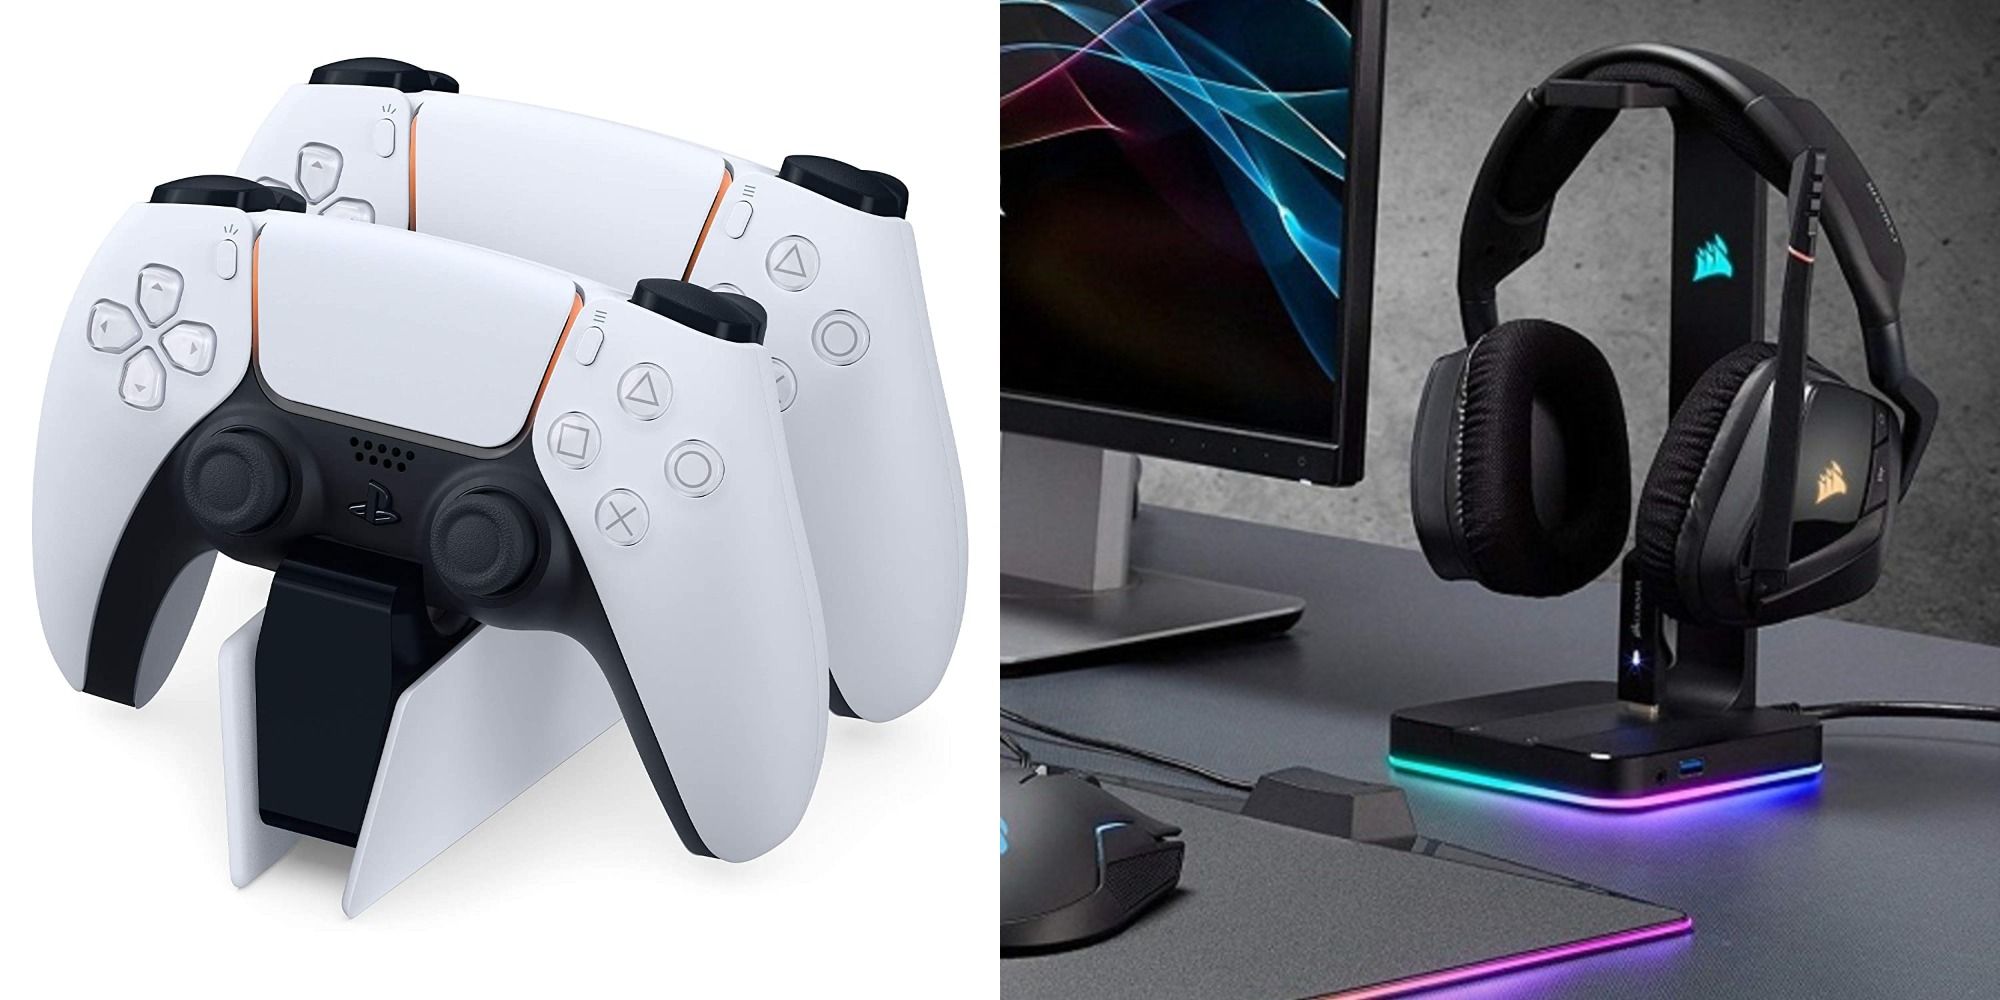 Split image showing a controller docking station and a headphone rack